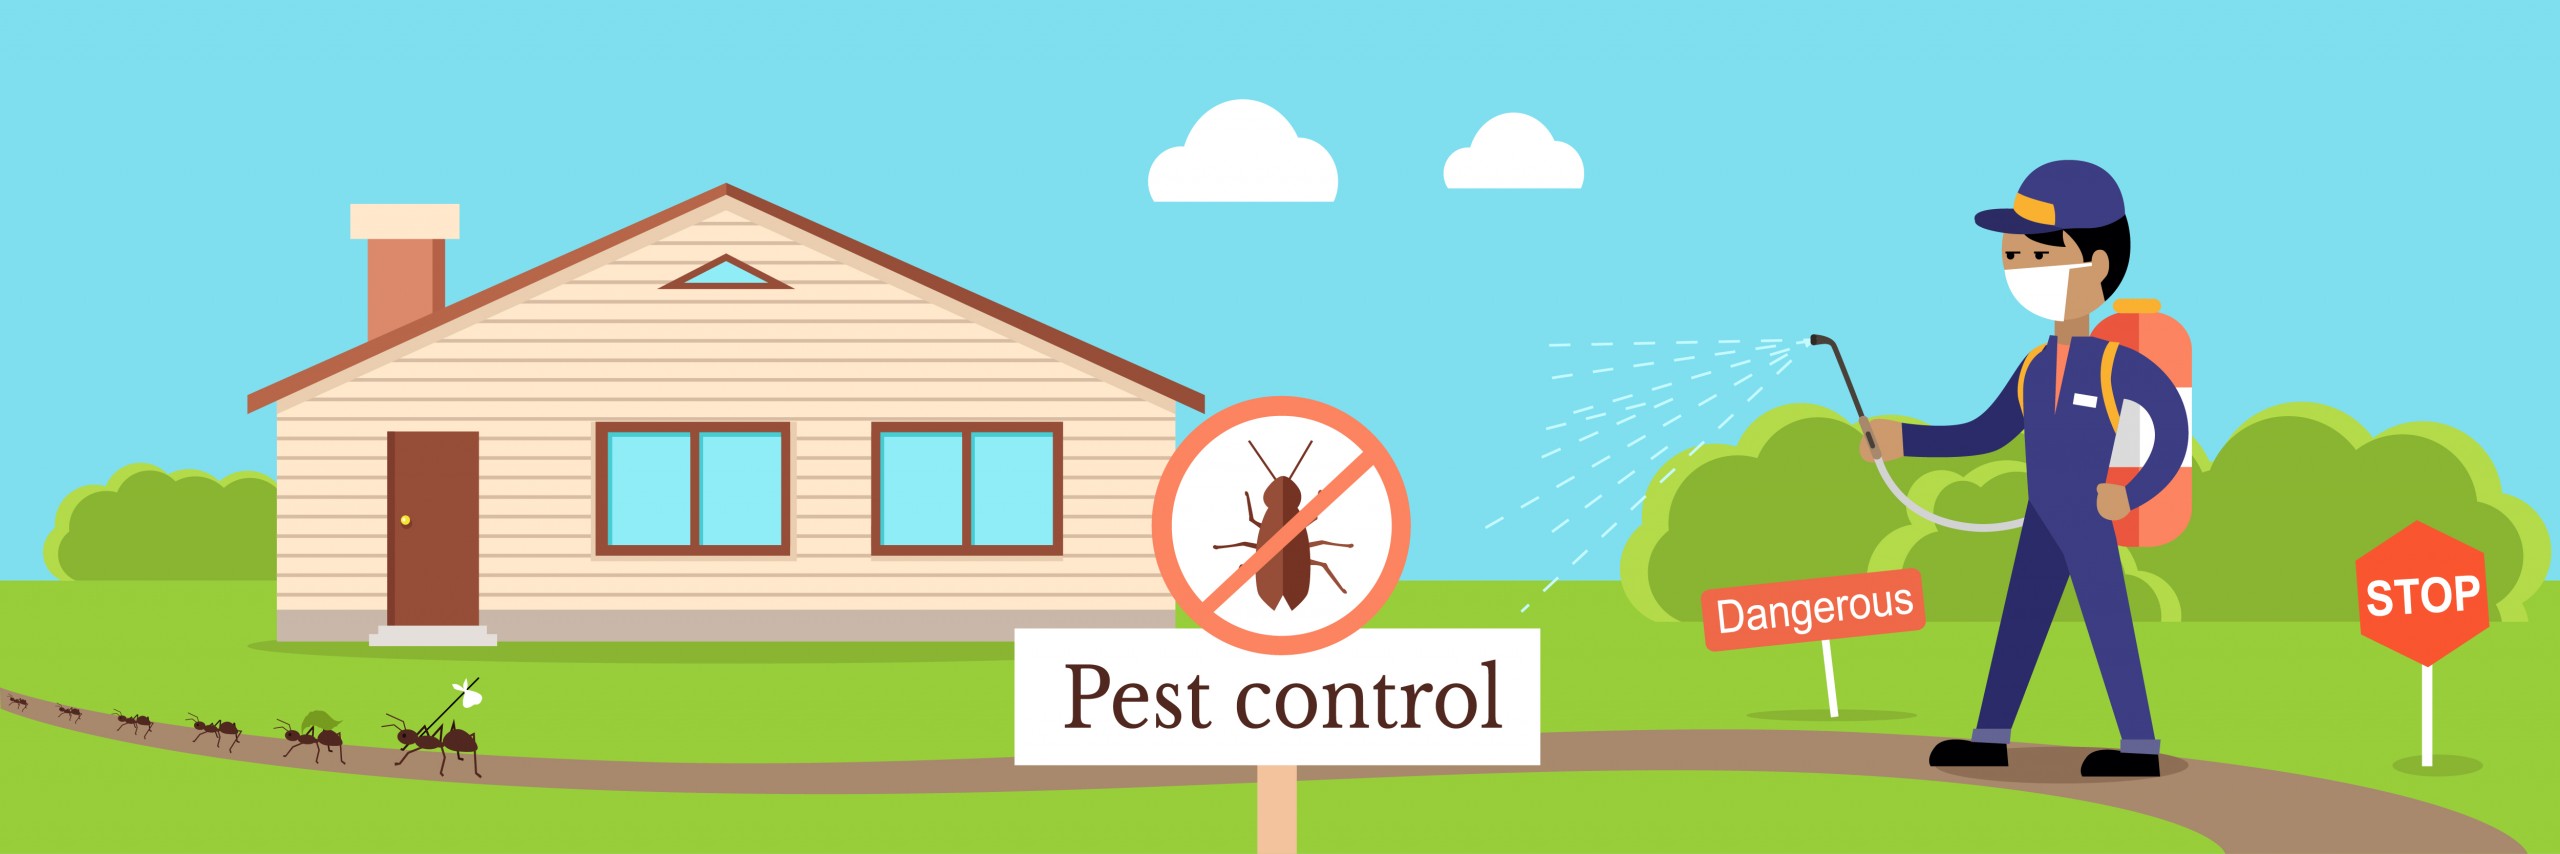 Get Rid of Pests With Different Types of Pest Control Services